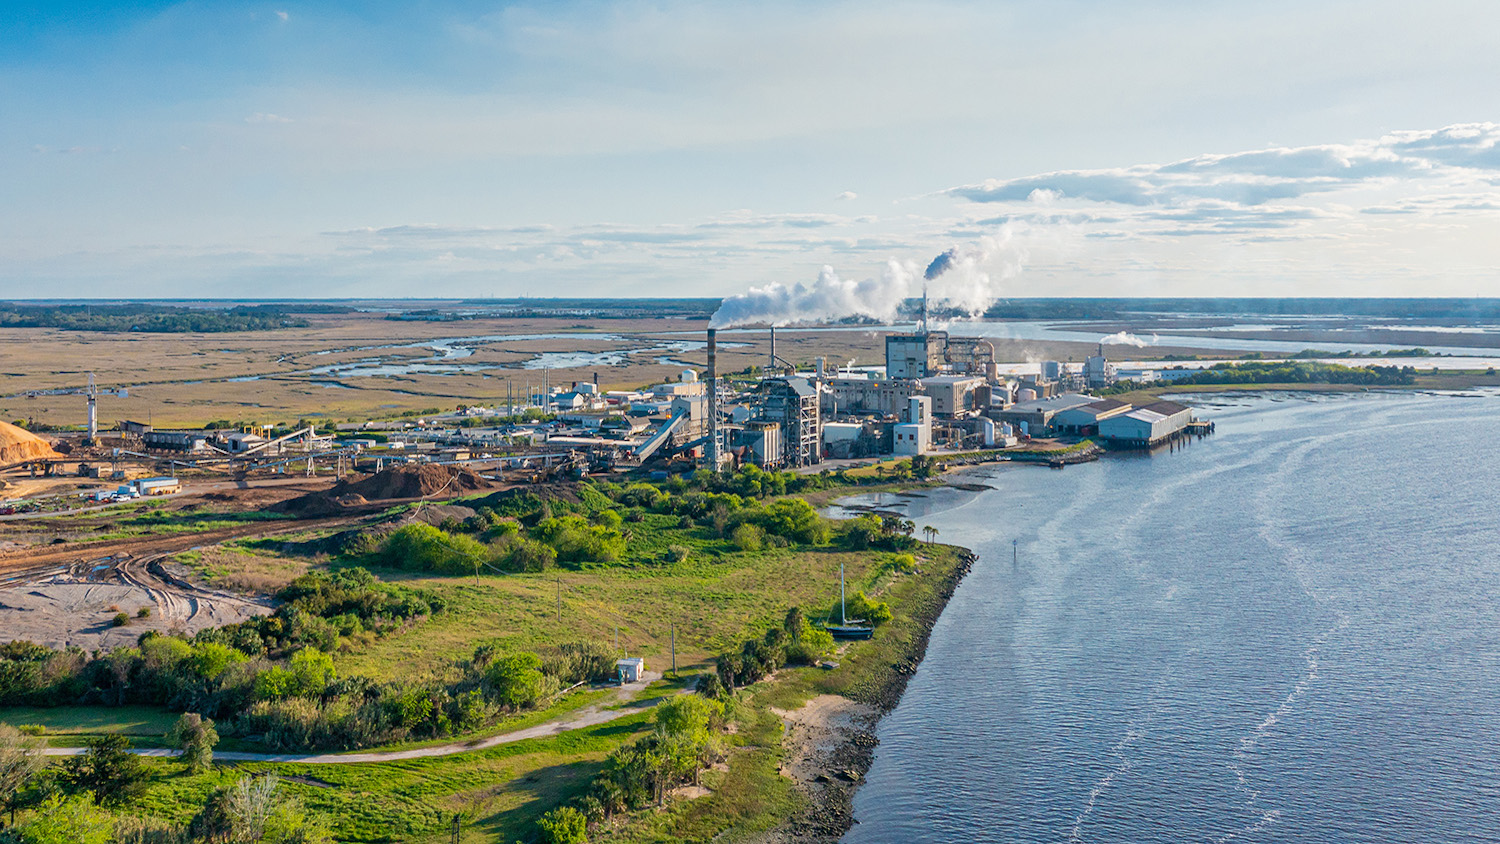 Aerial photo of a paper mill in Fernandina Beach near Jacksonville, Florida. - NC State Researchers Developing Climate-friendly Solution for Pulp and Paper Industry - College of Natural Resources News NC State University